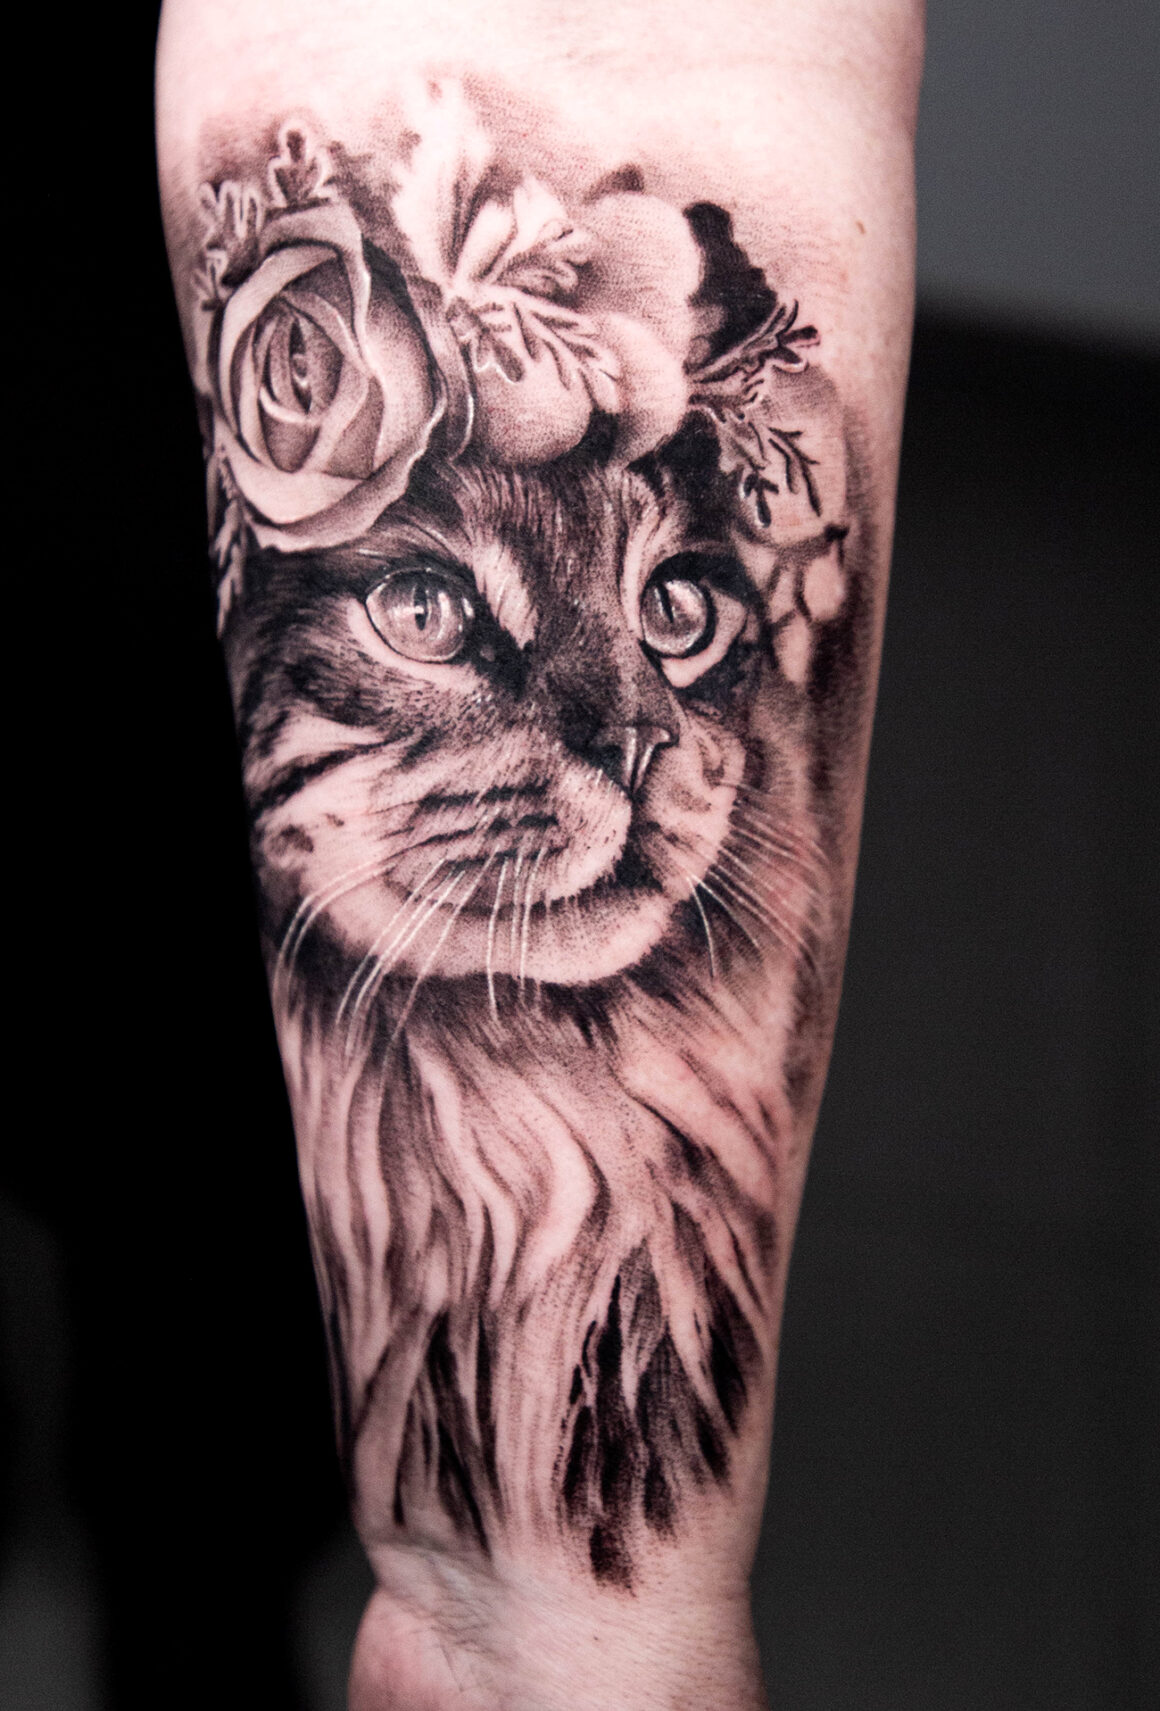 Tattoo by Angélique Grimm, @angeliquegrimmtattoo